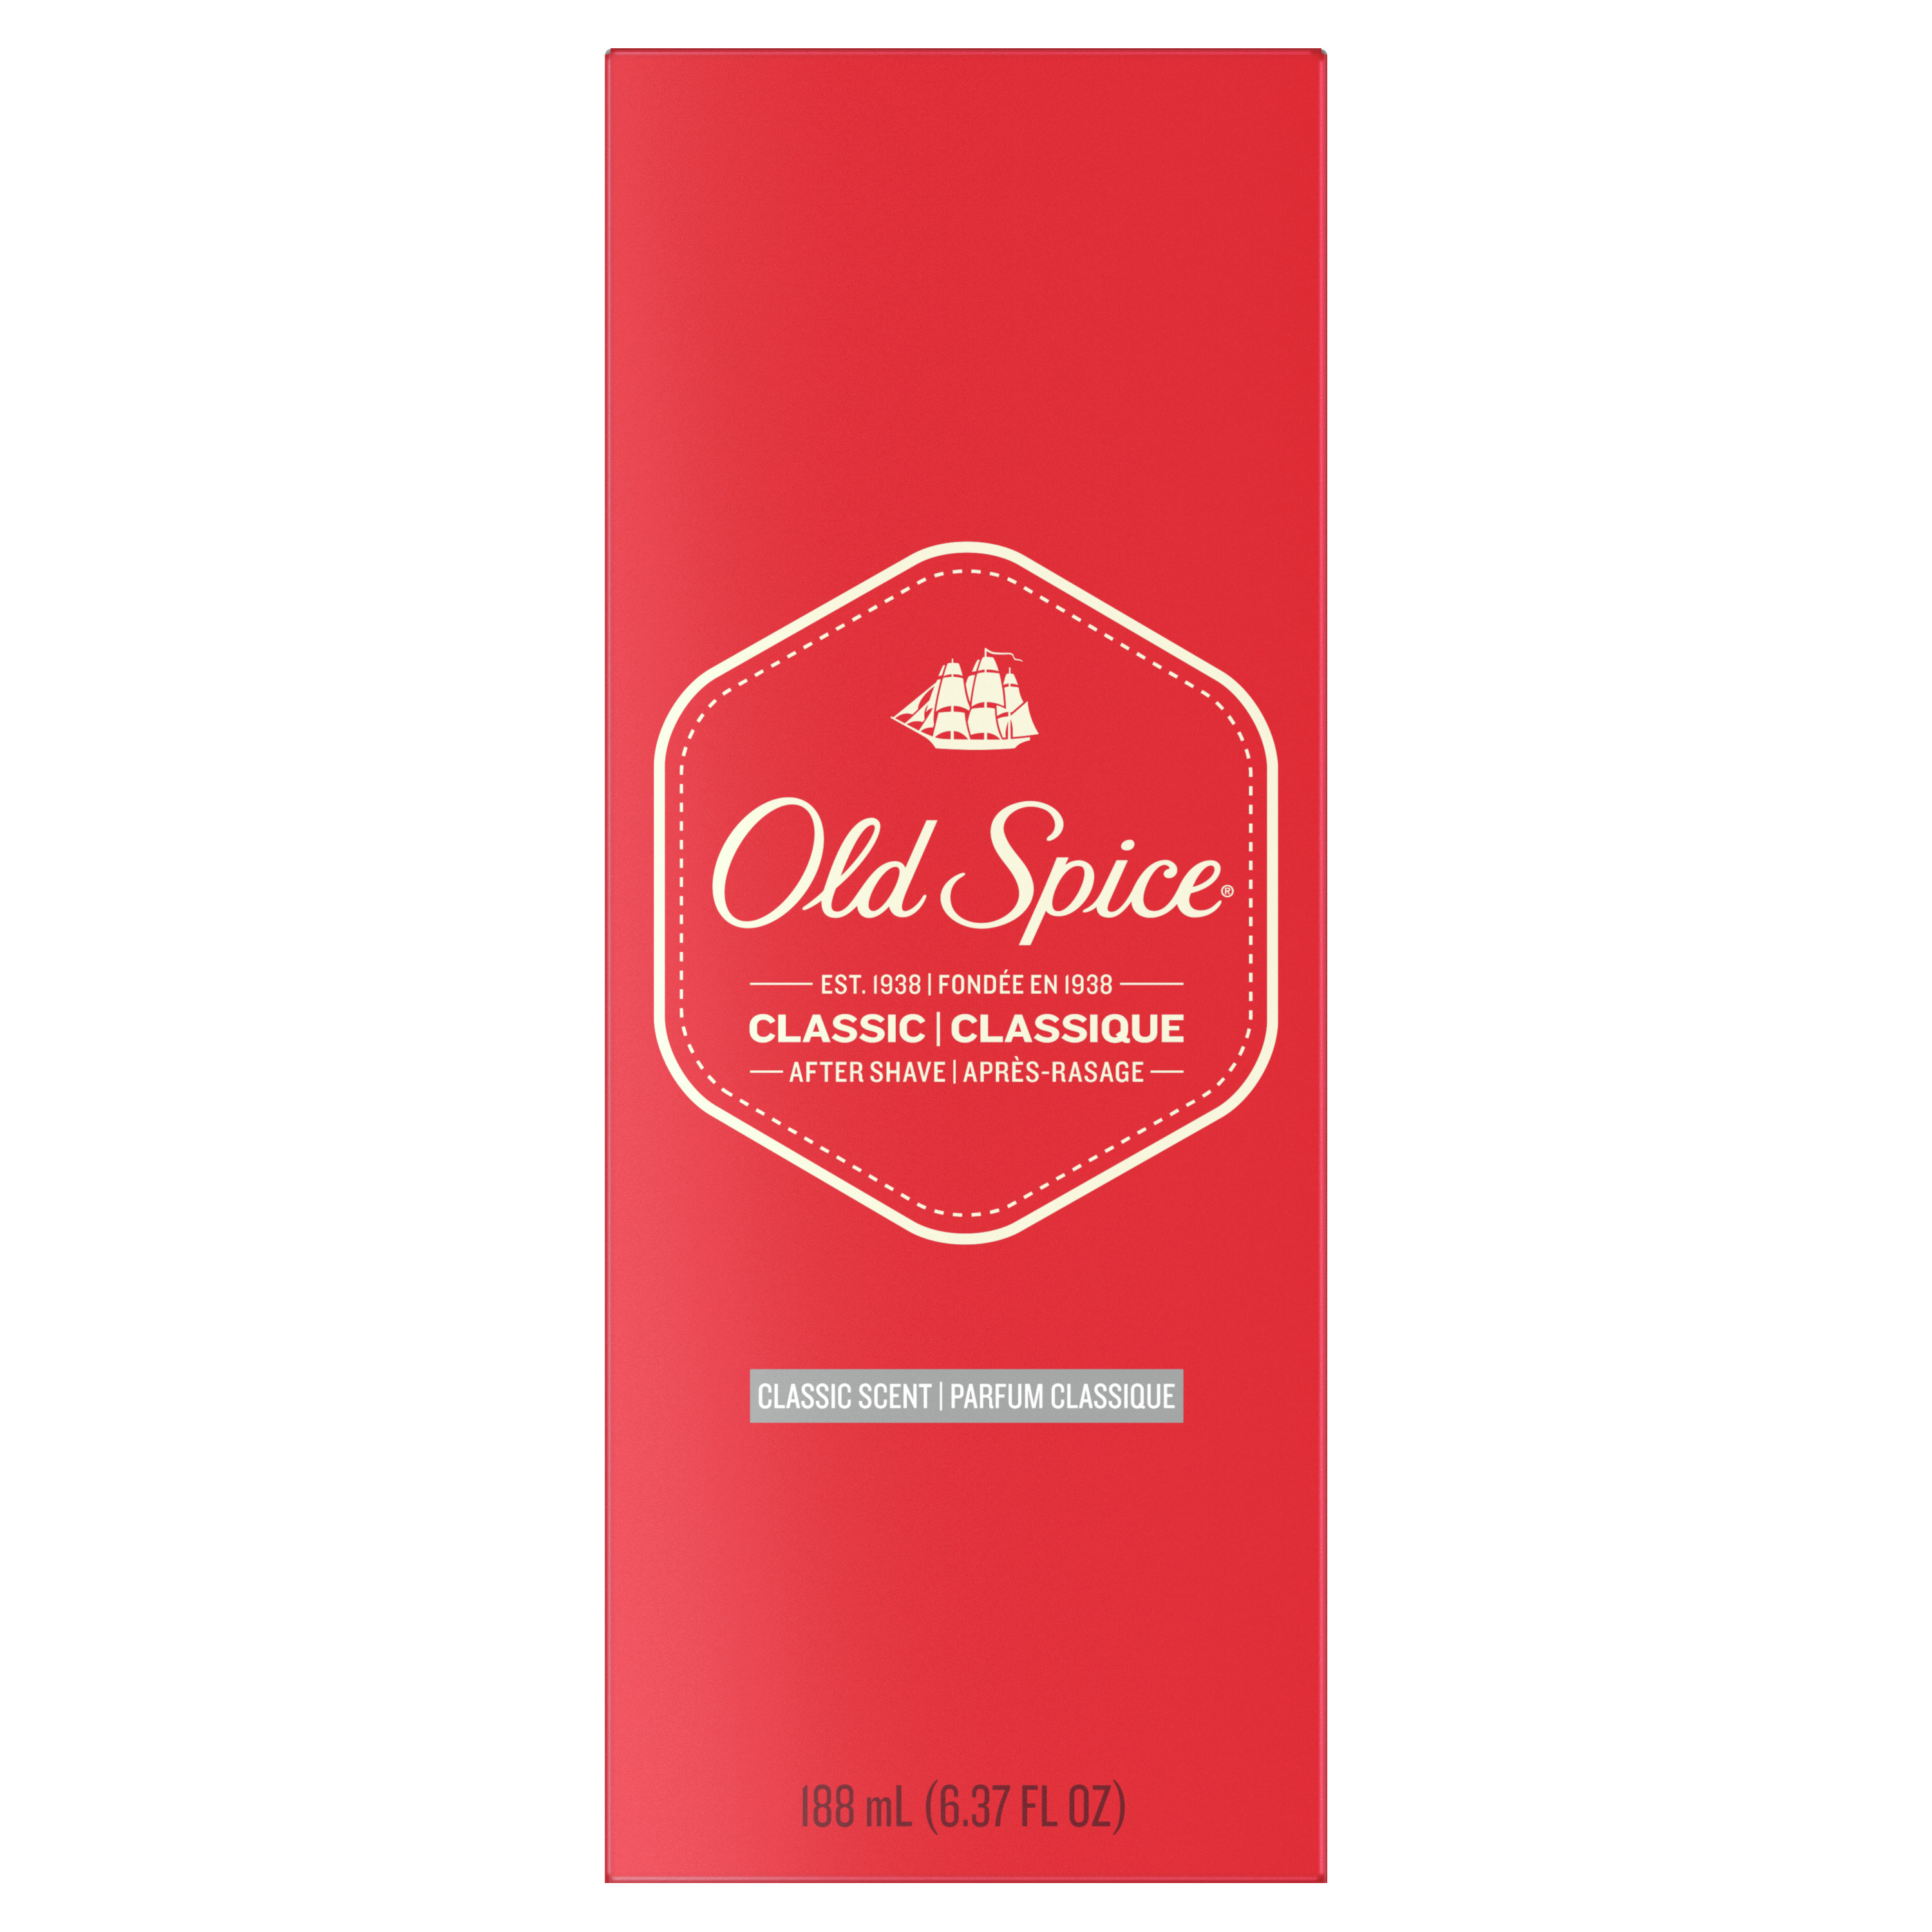 Old Spice Classic Scent Men's Aftershave, 6.37 fl oz - image 5 of 6